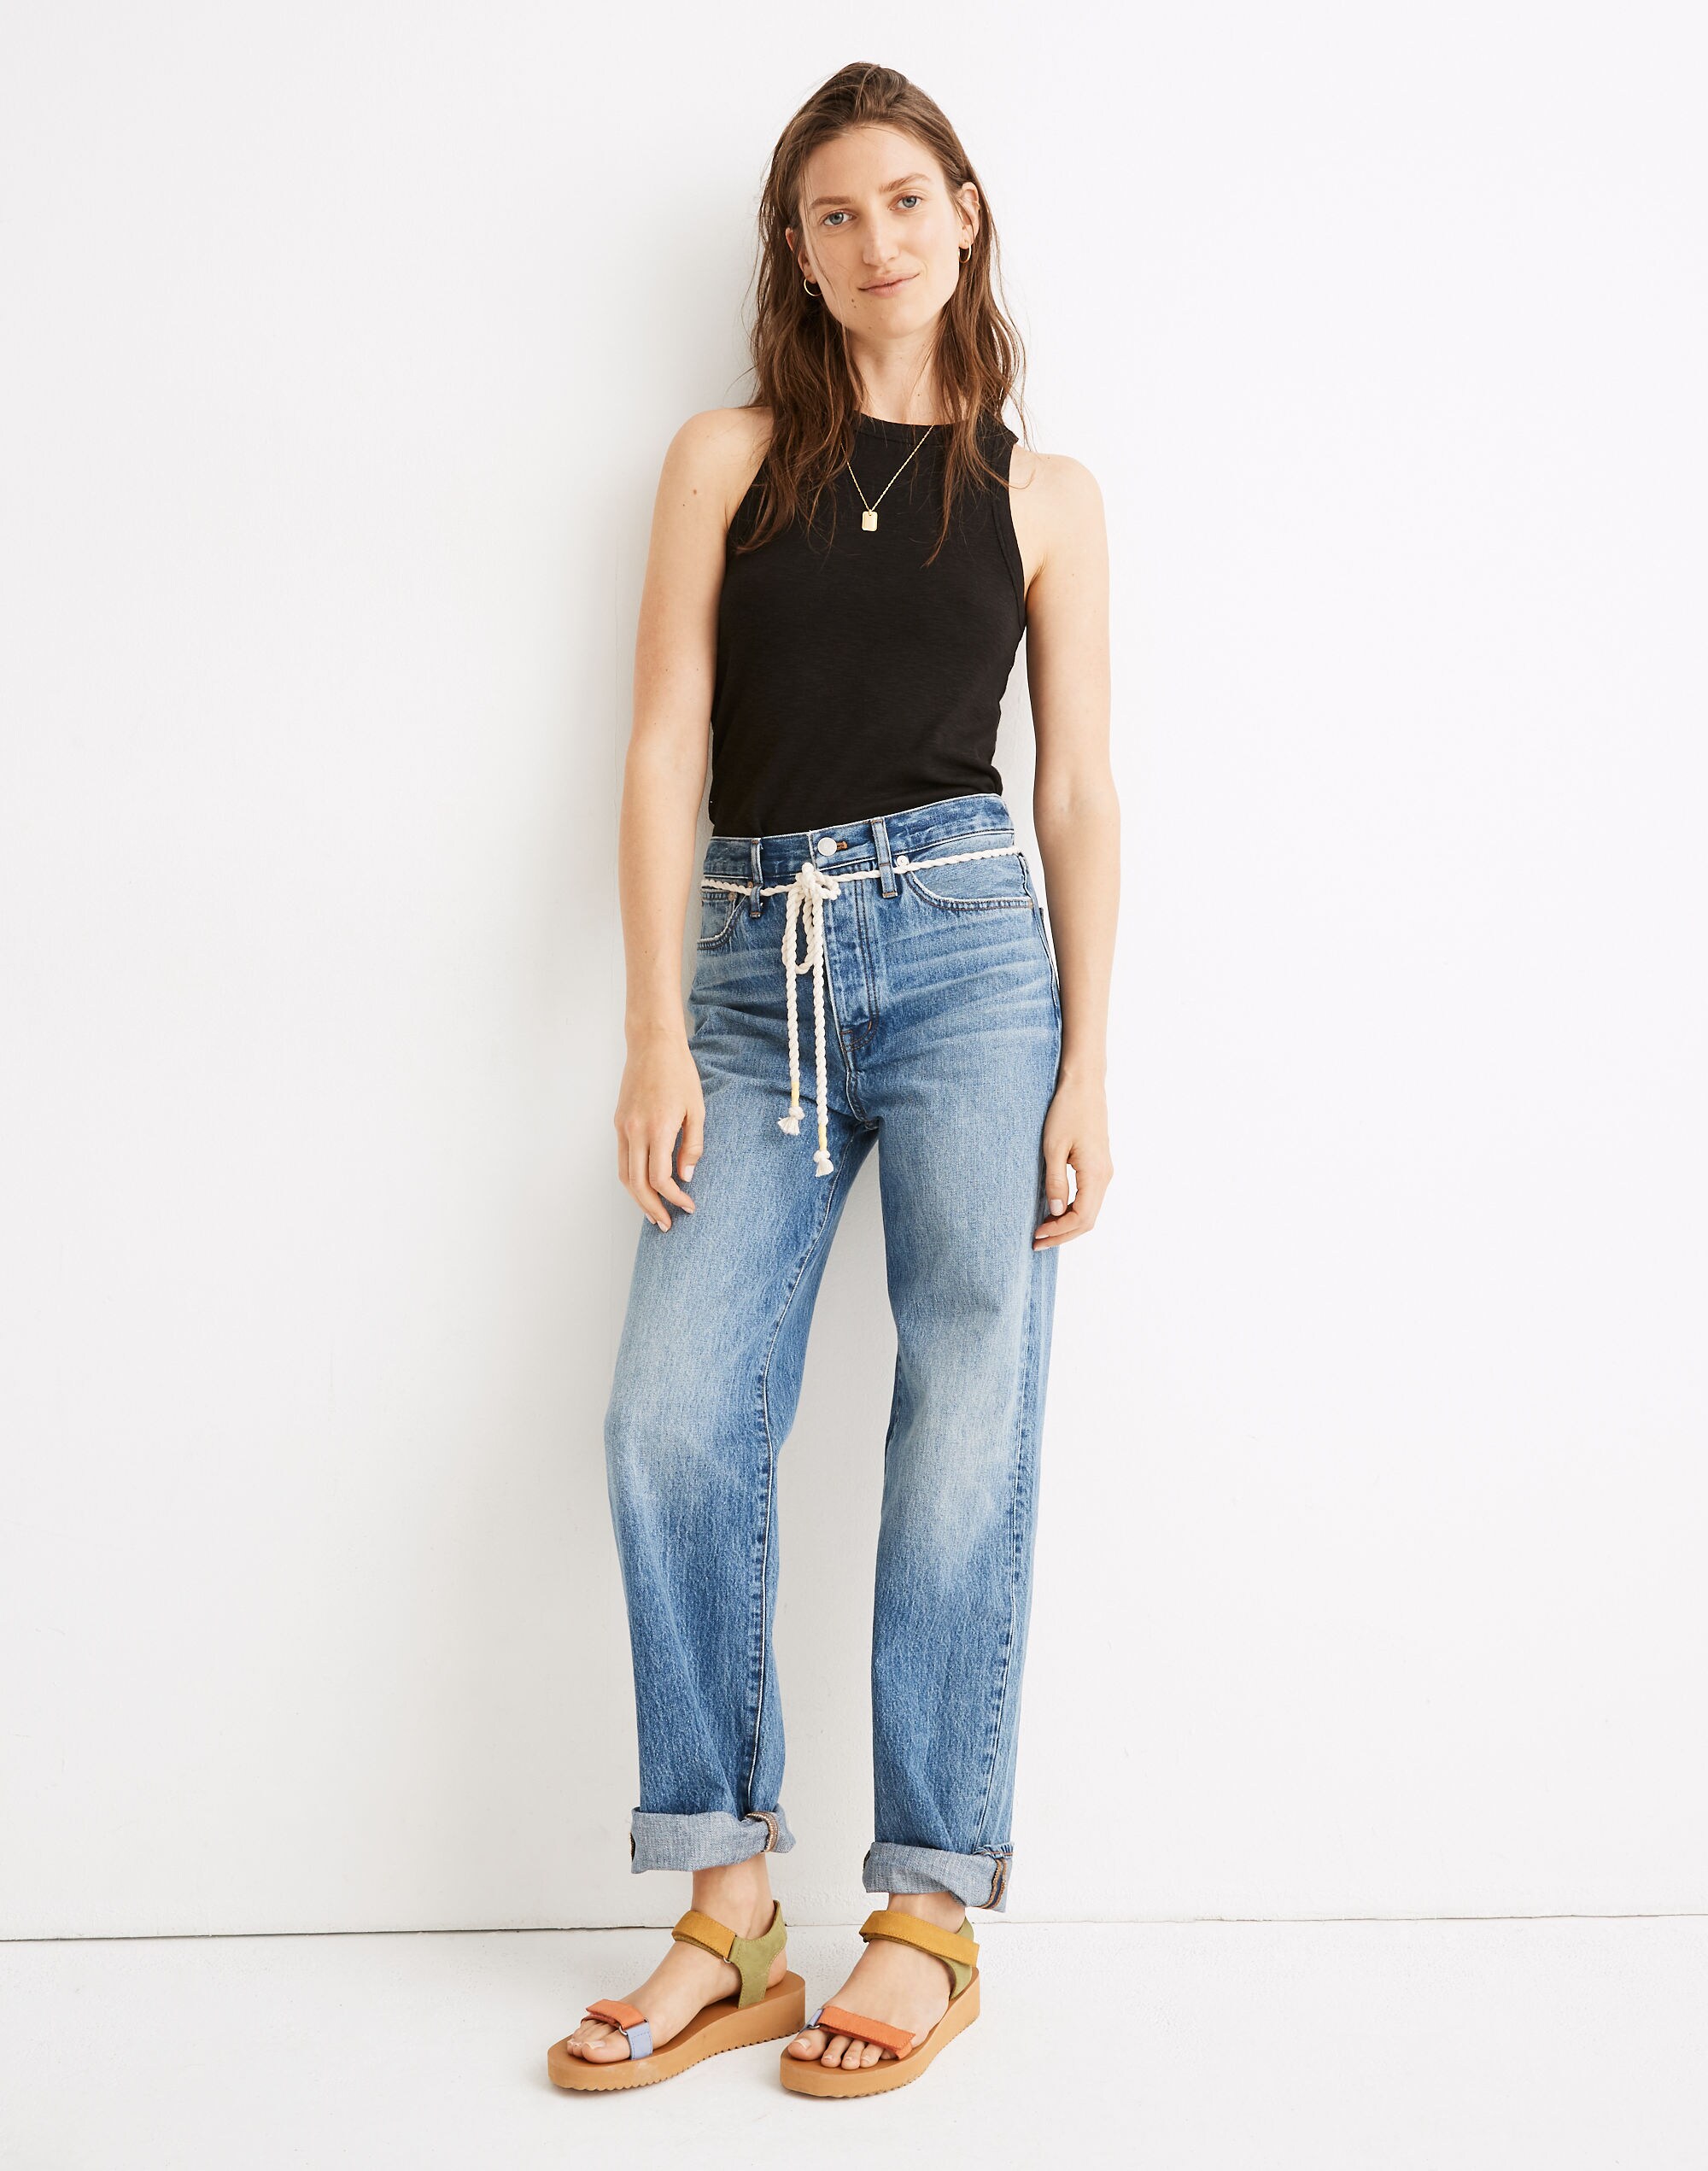 NEW Madewell Stovepipe Jeans in Leaside Wash, 26